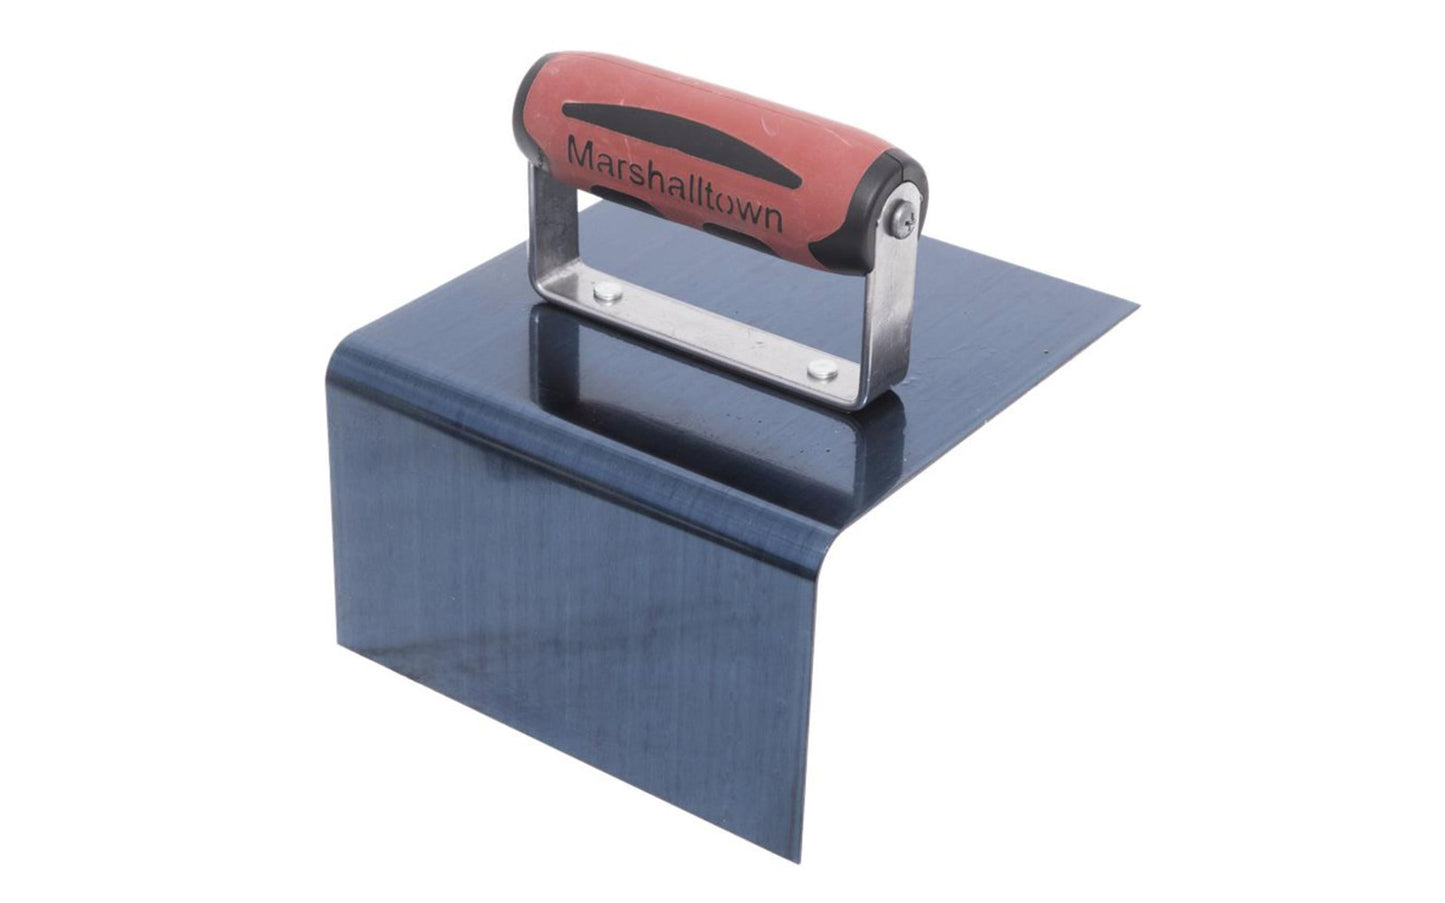 Marshalltown 6" x 6" x 3" Step Tool. Marshalltown Step Tools help finish concrete step edges and coves to prevent future cracking. Model 175BD ~ 035965042161